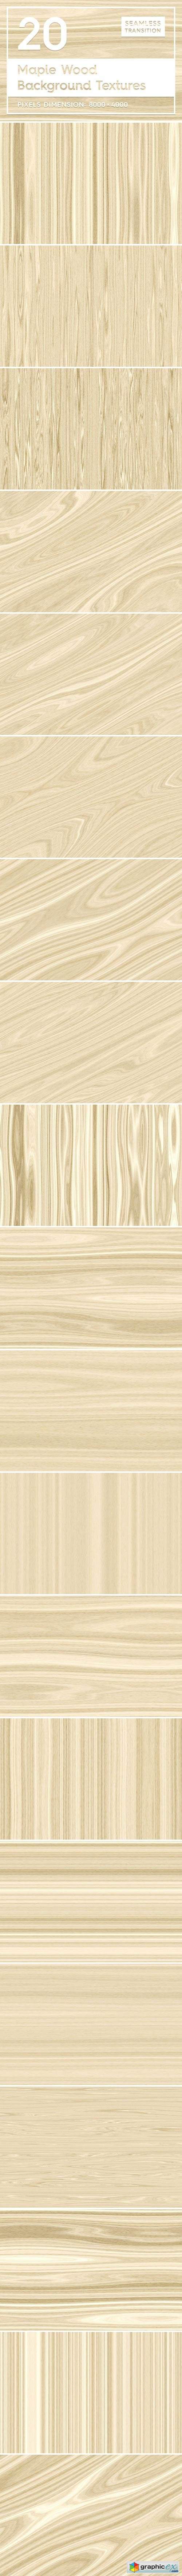 20 Maple Wood Background Textures